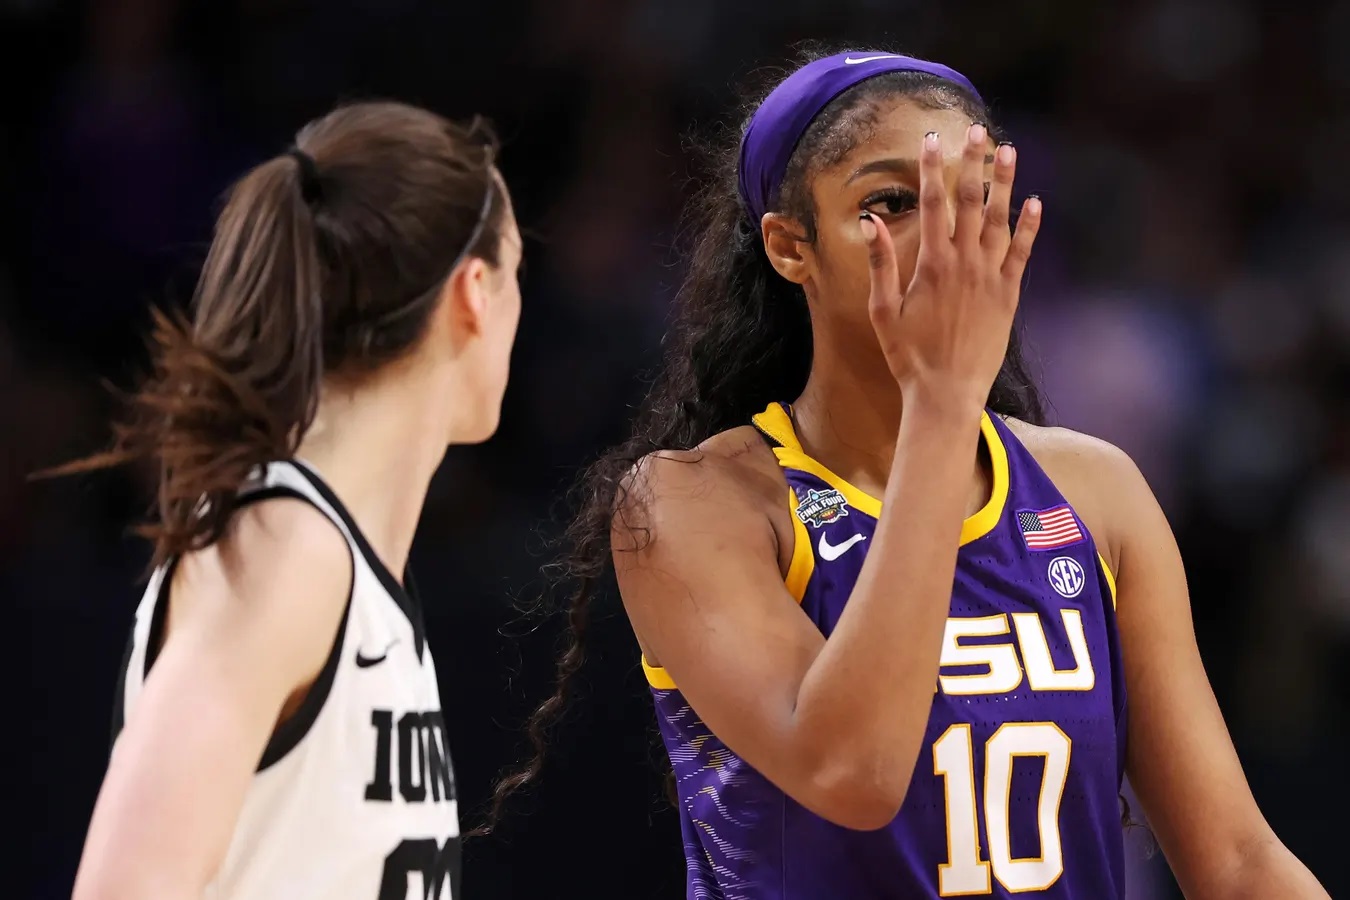 Caitlin Clark and Angel Reese Pose For Viral Selfie Ahead of WNBA Draft ...